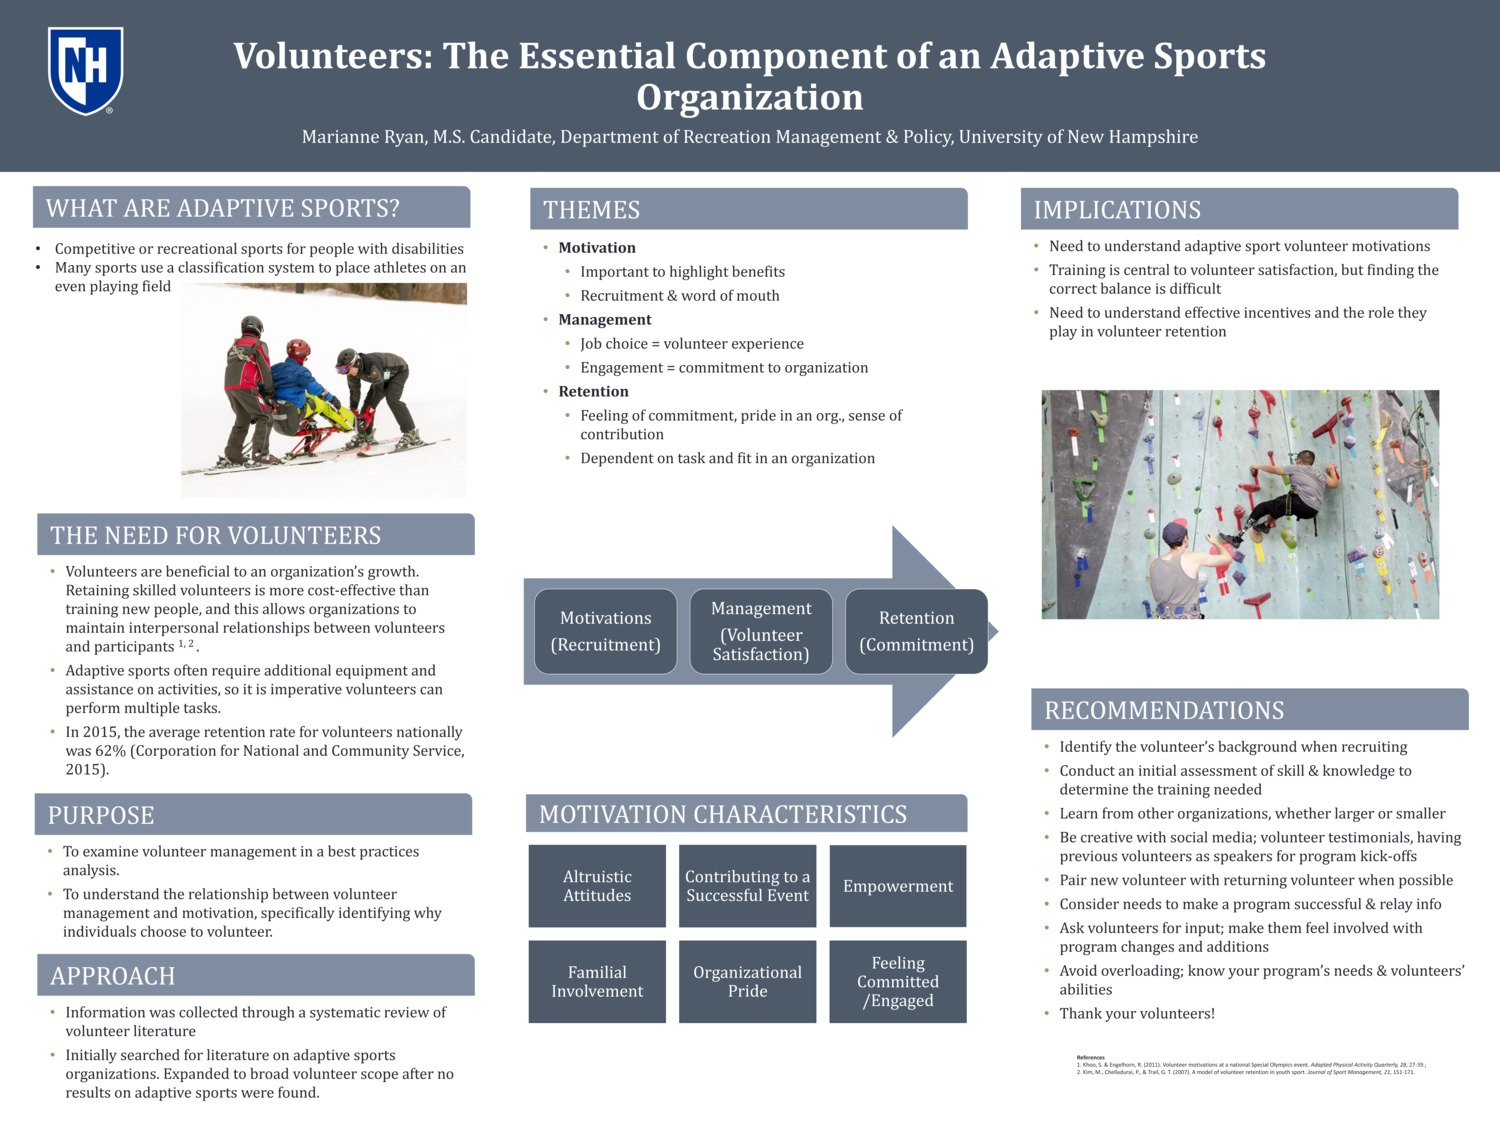 Volunteers: The Essential Component Of An Adaptive Sports Organization by mfr1003